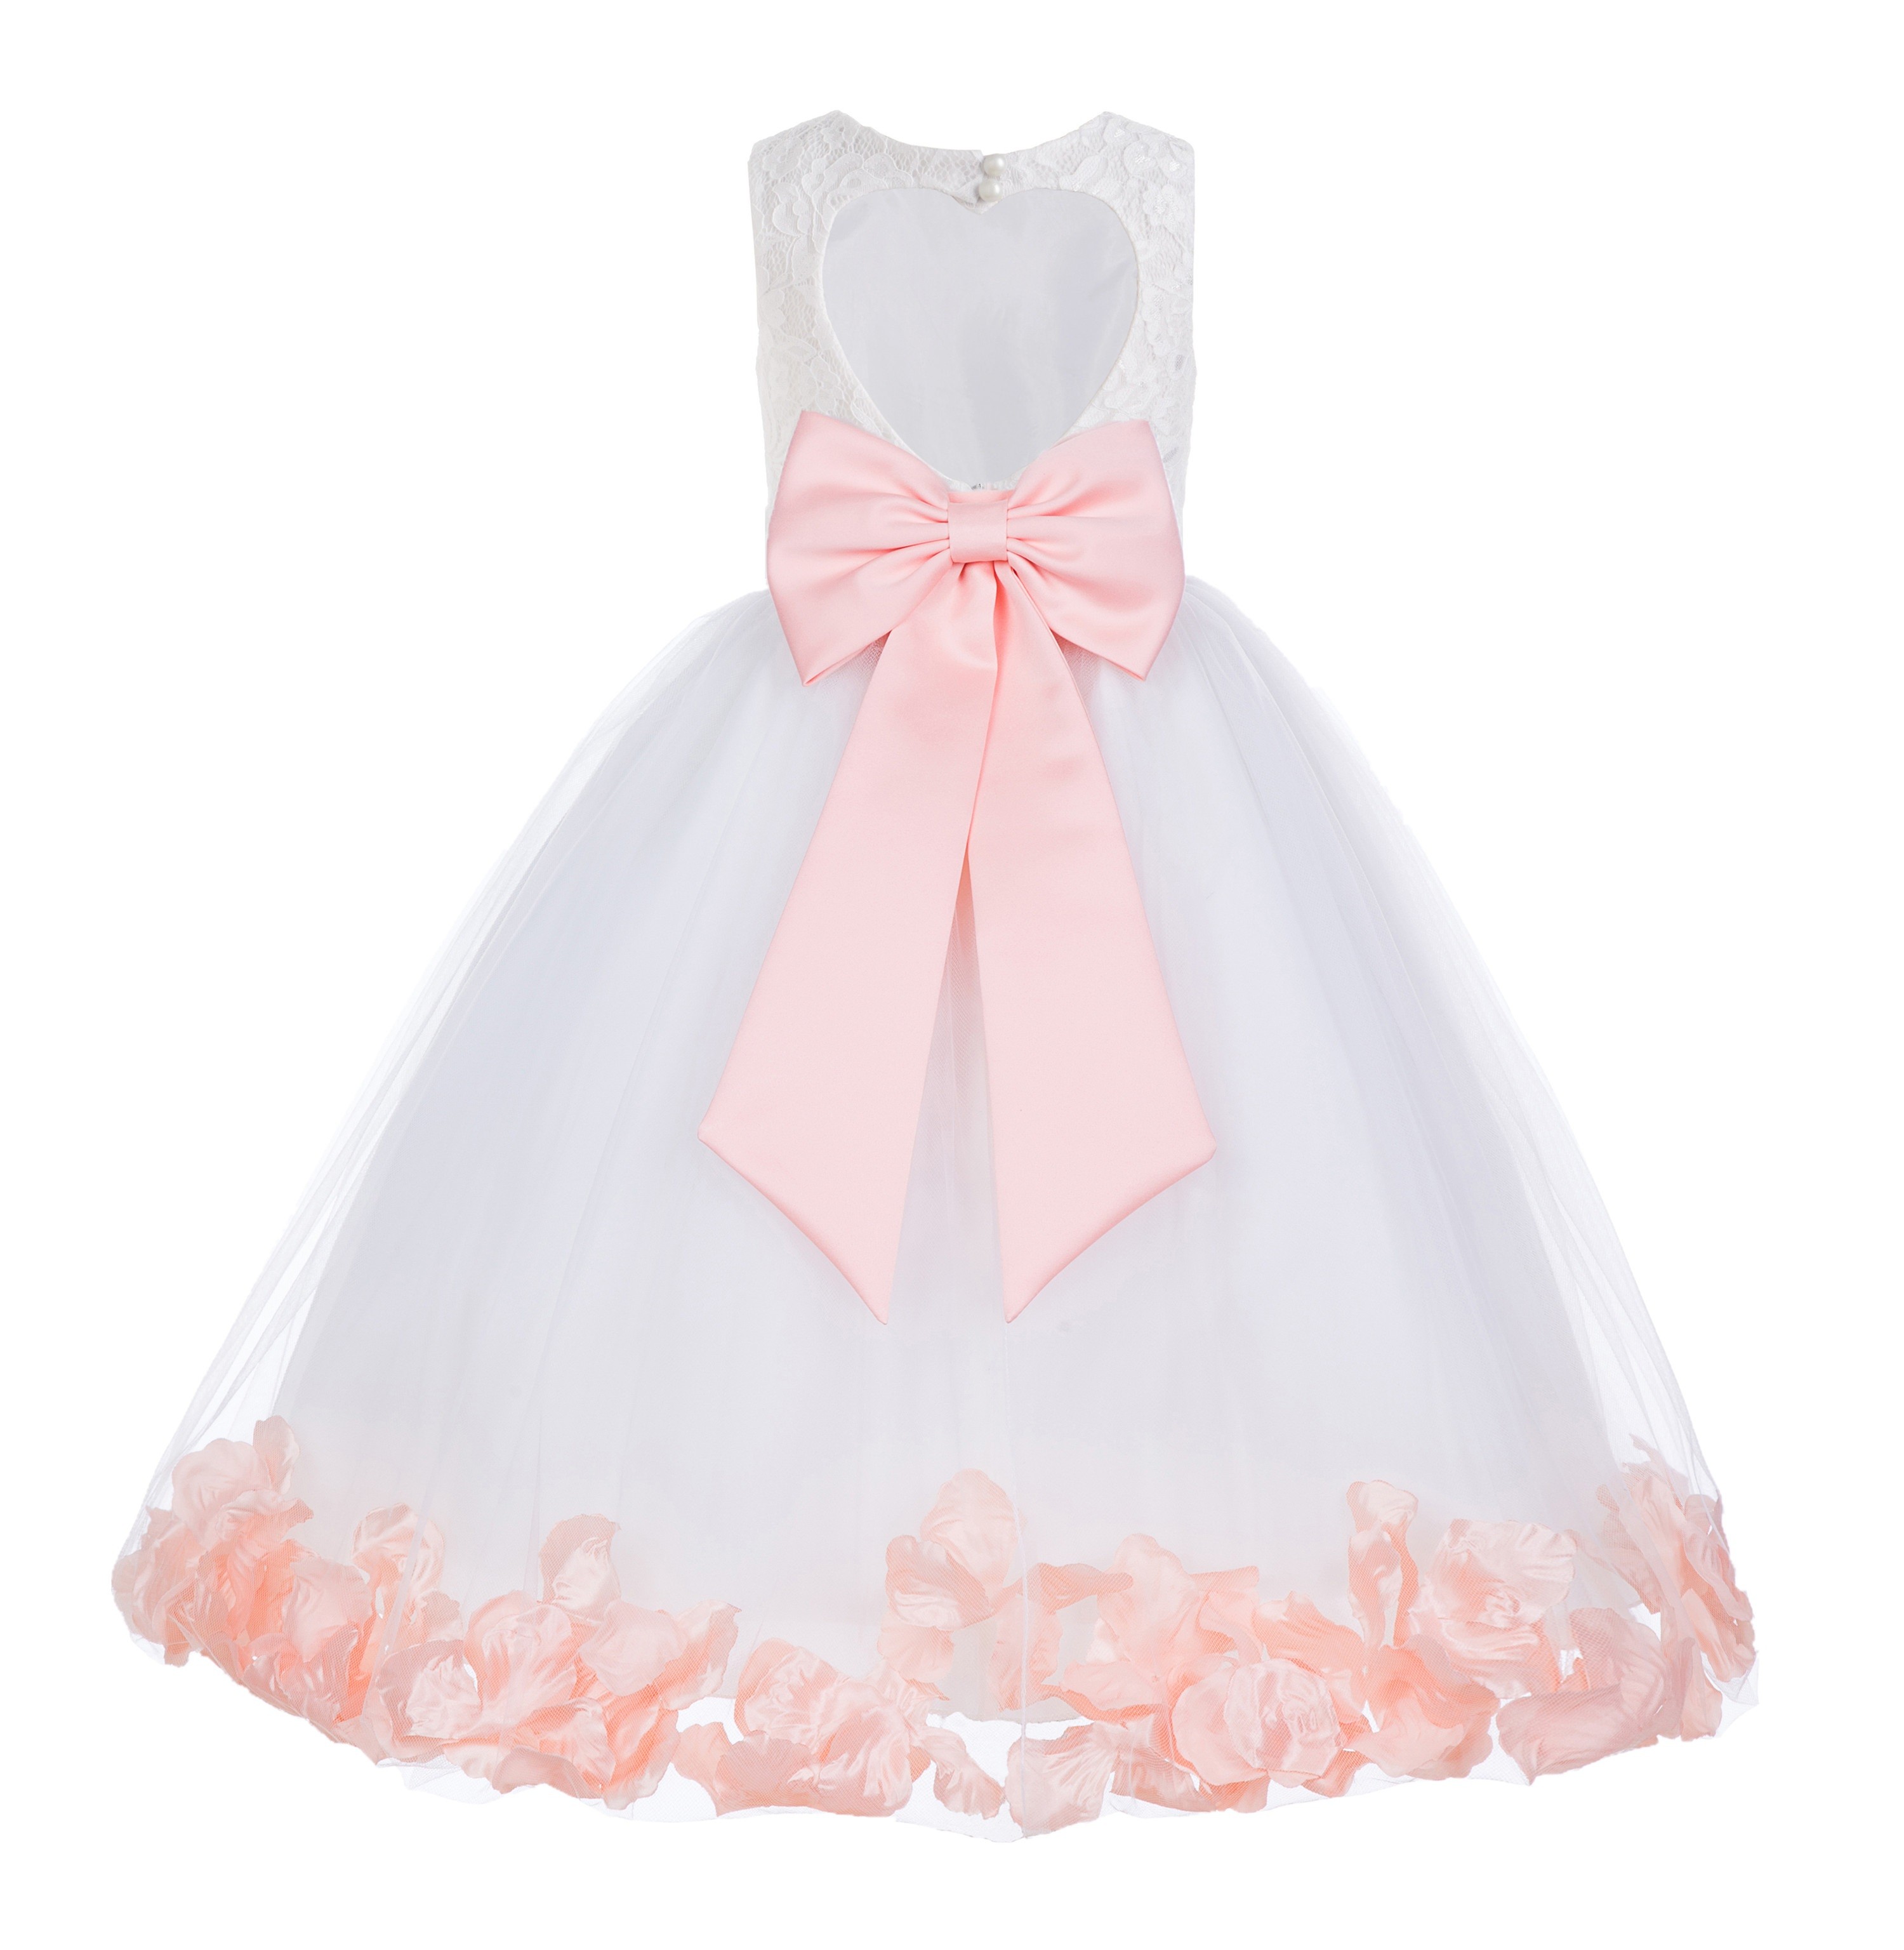 White / Peach Floral Lace Heart Cutout Flower Girl Dress with Petals 185T